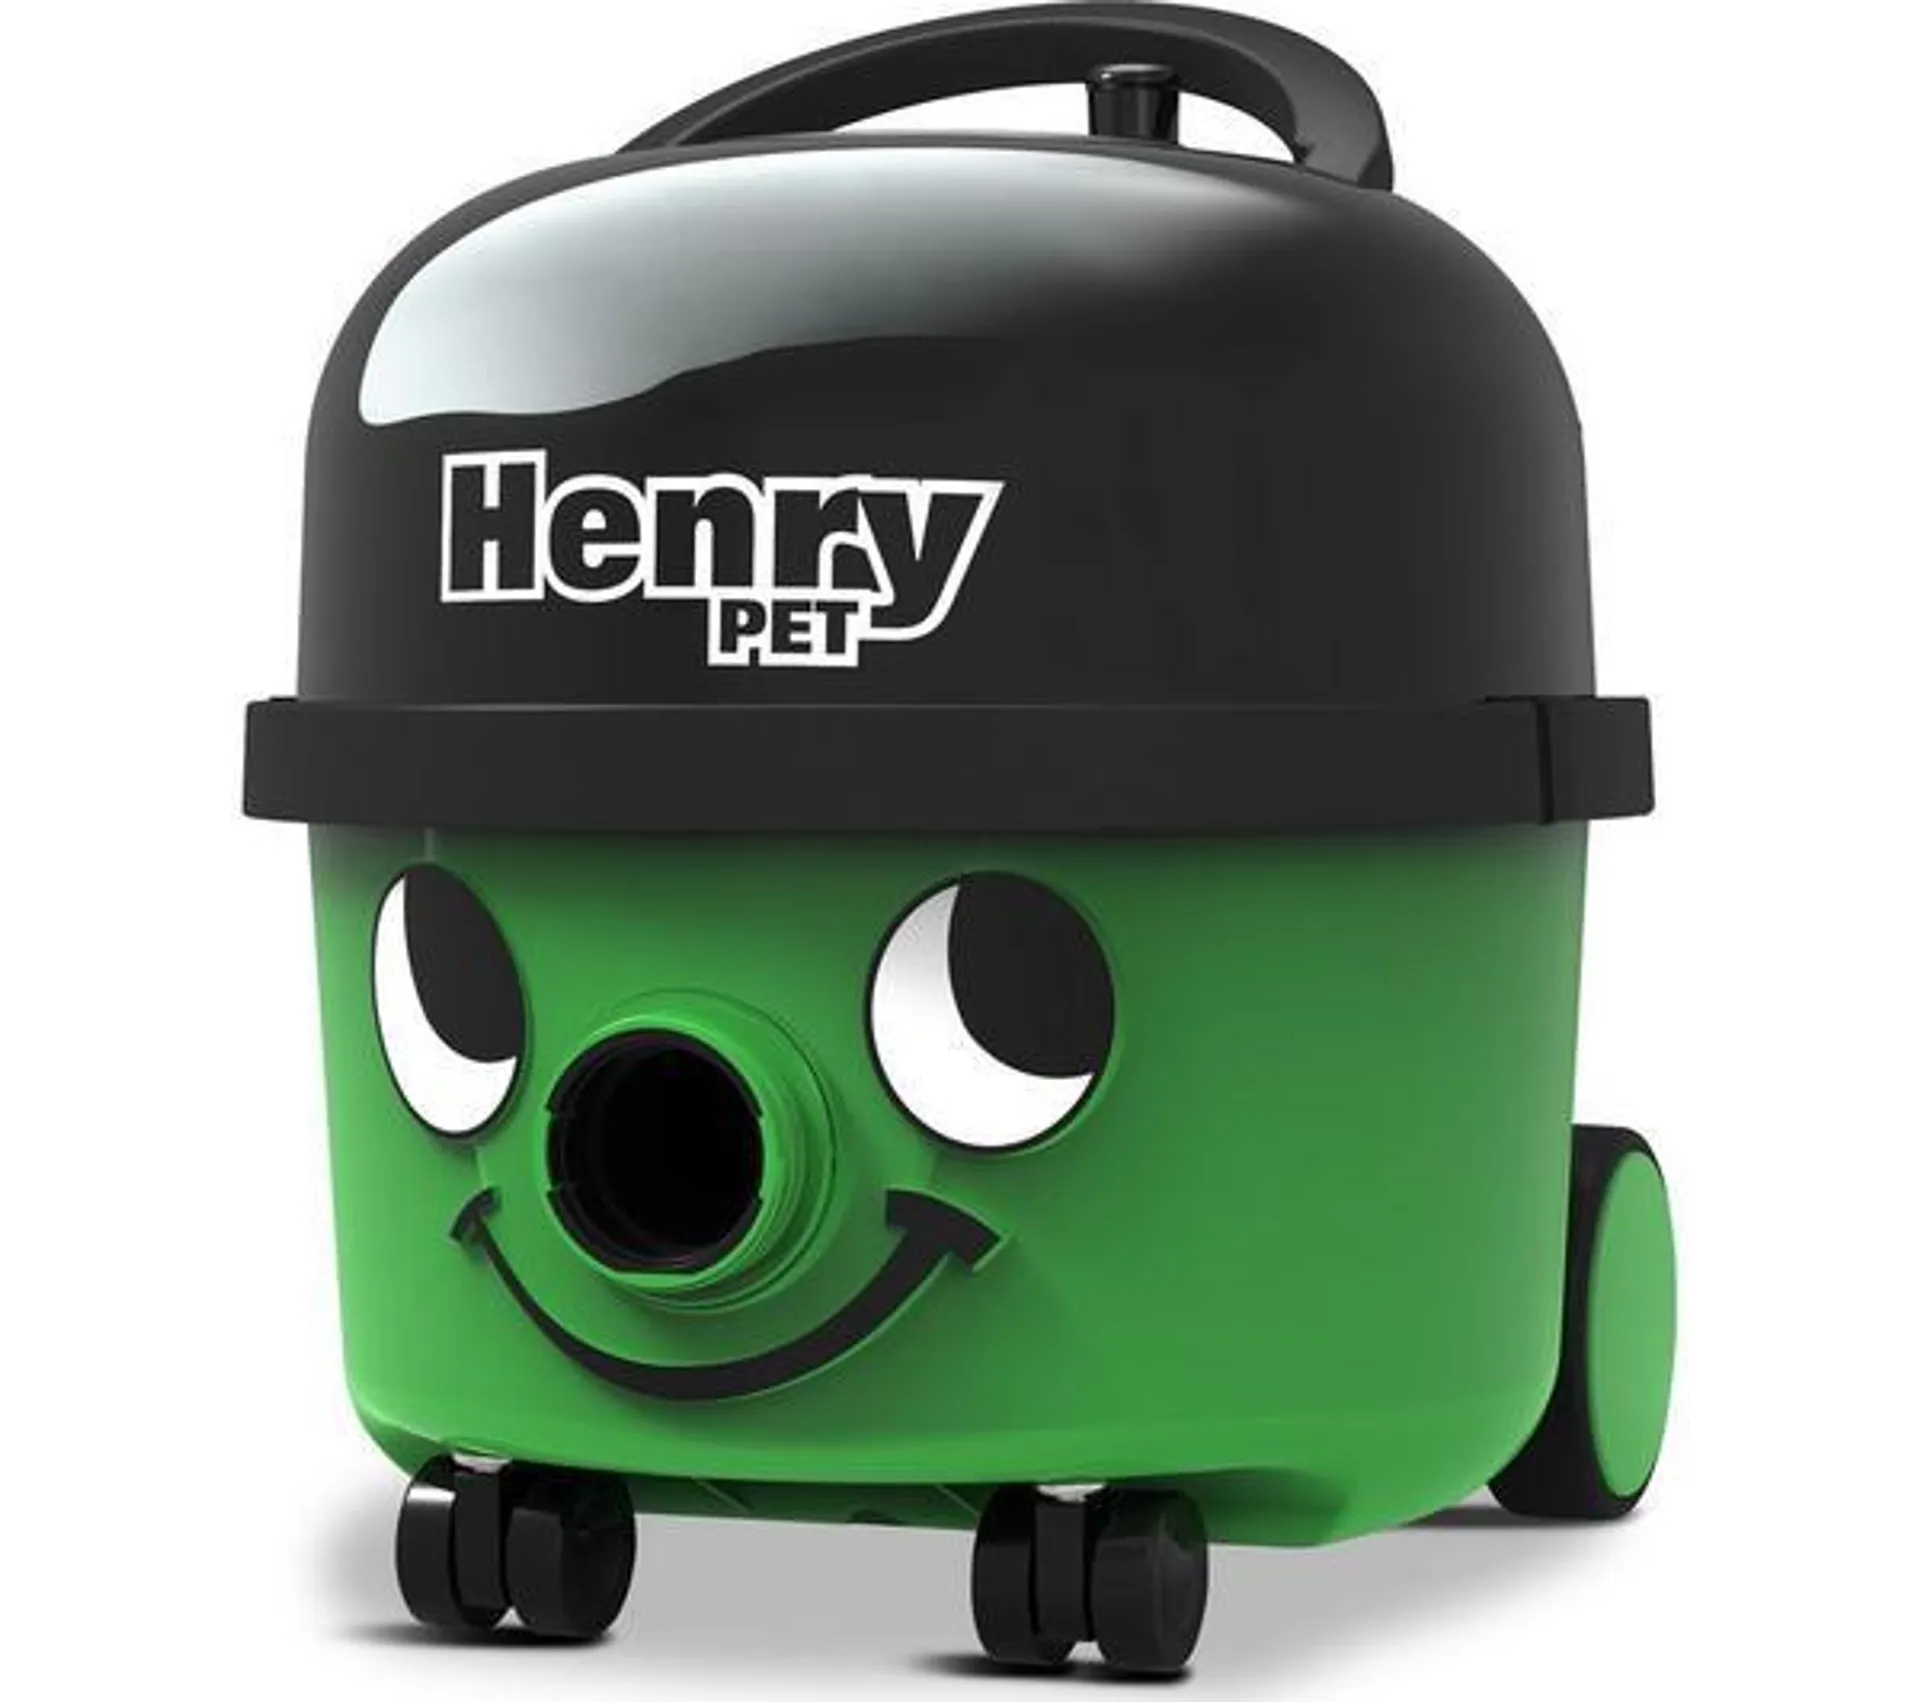 NUMATIC Henry PET200 Cylinder Bagged Vacuum Cleaner - Green